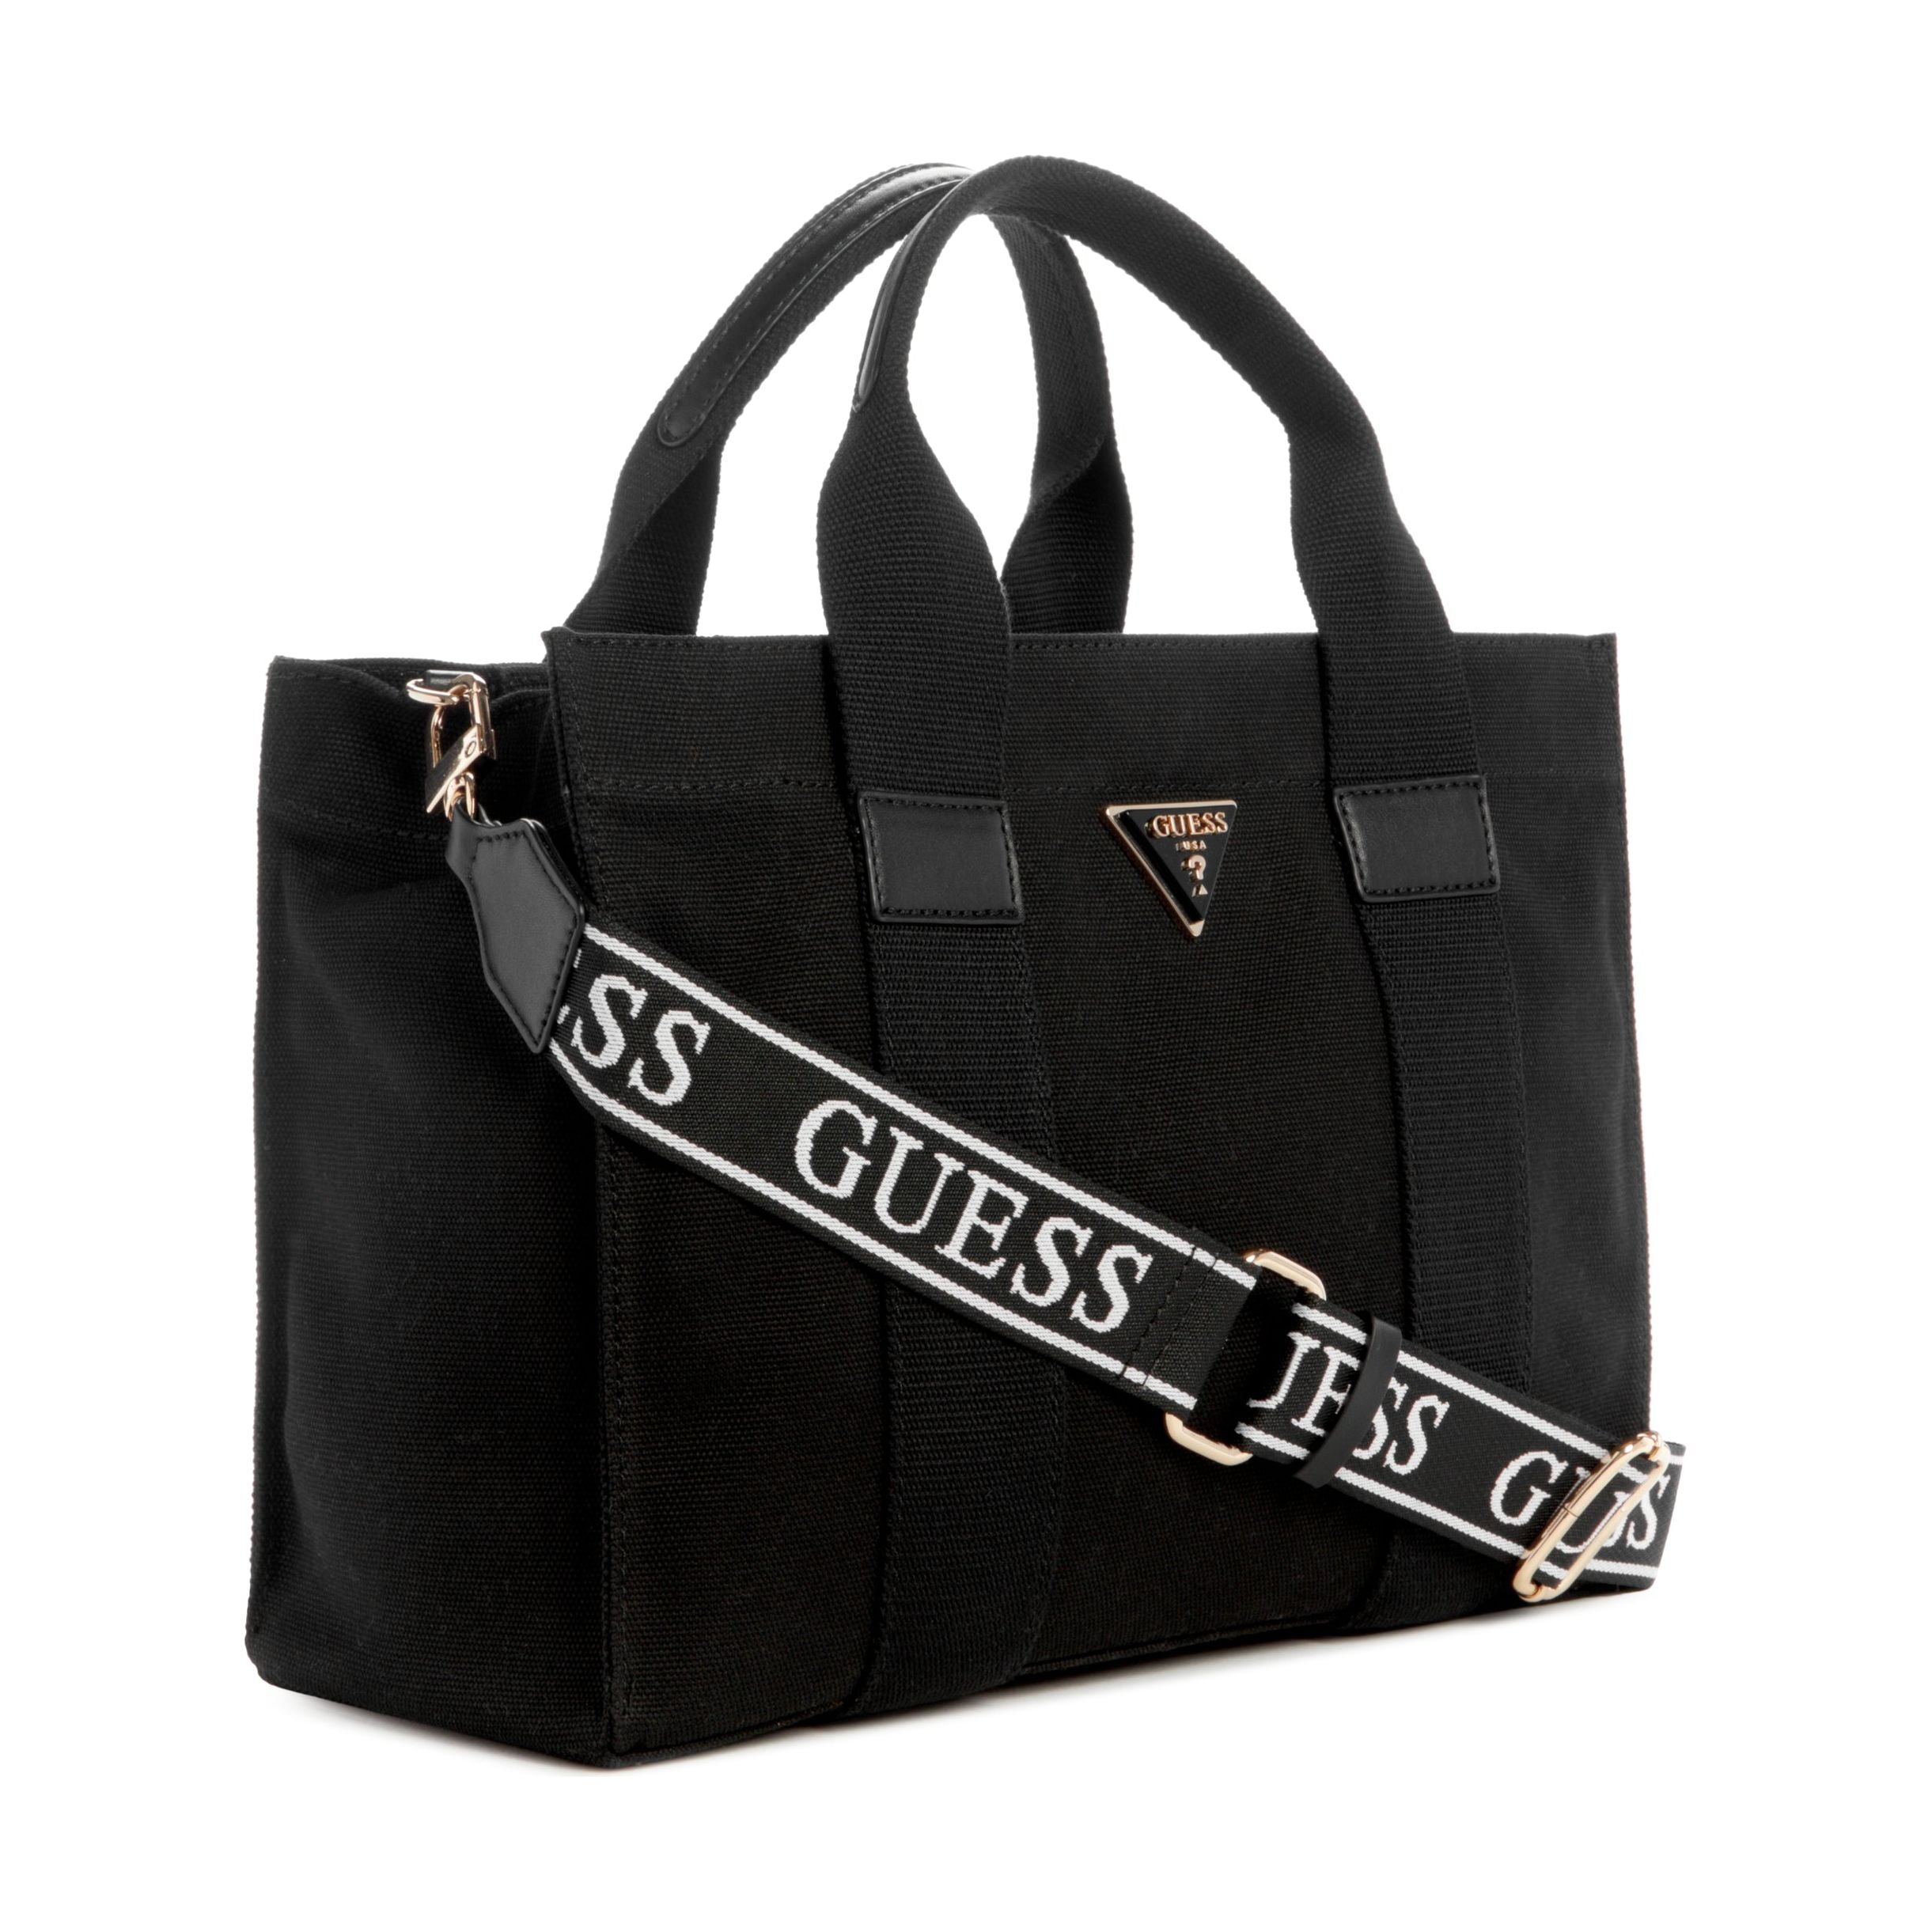 Guess - Canvas Tote in Black